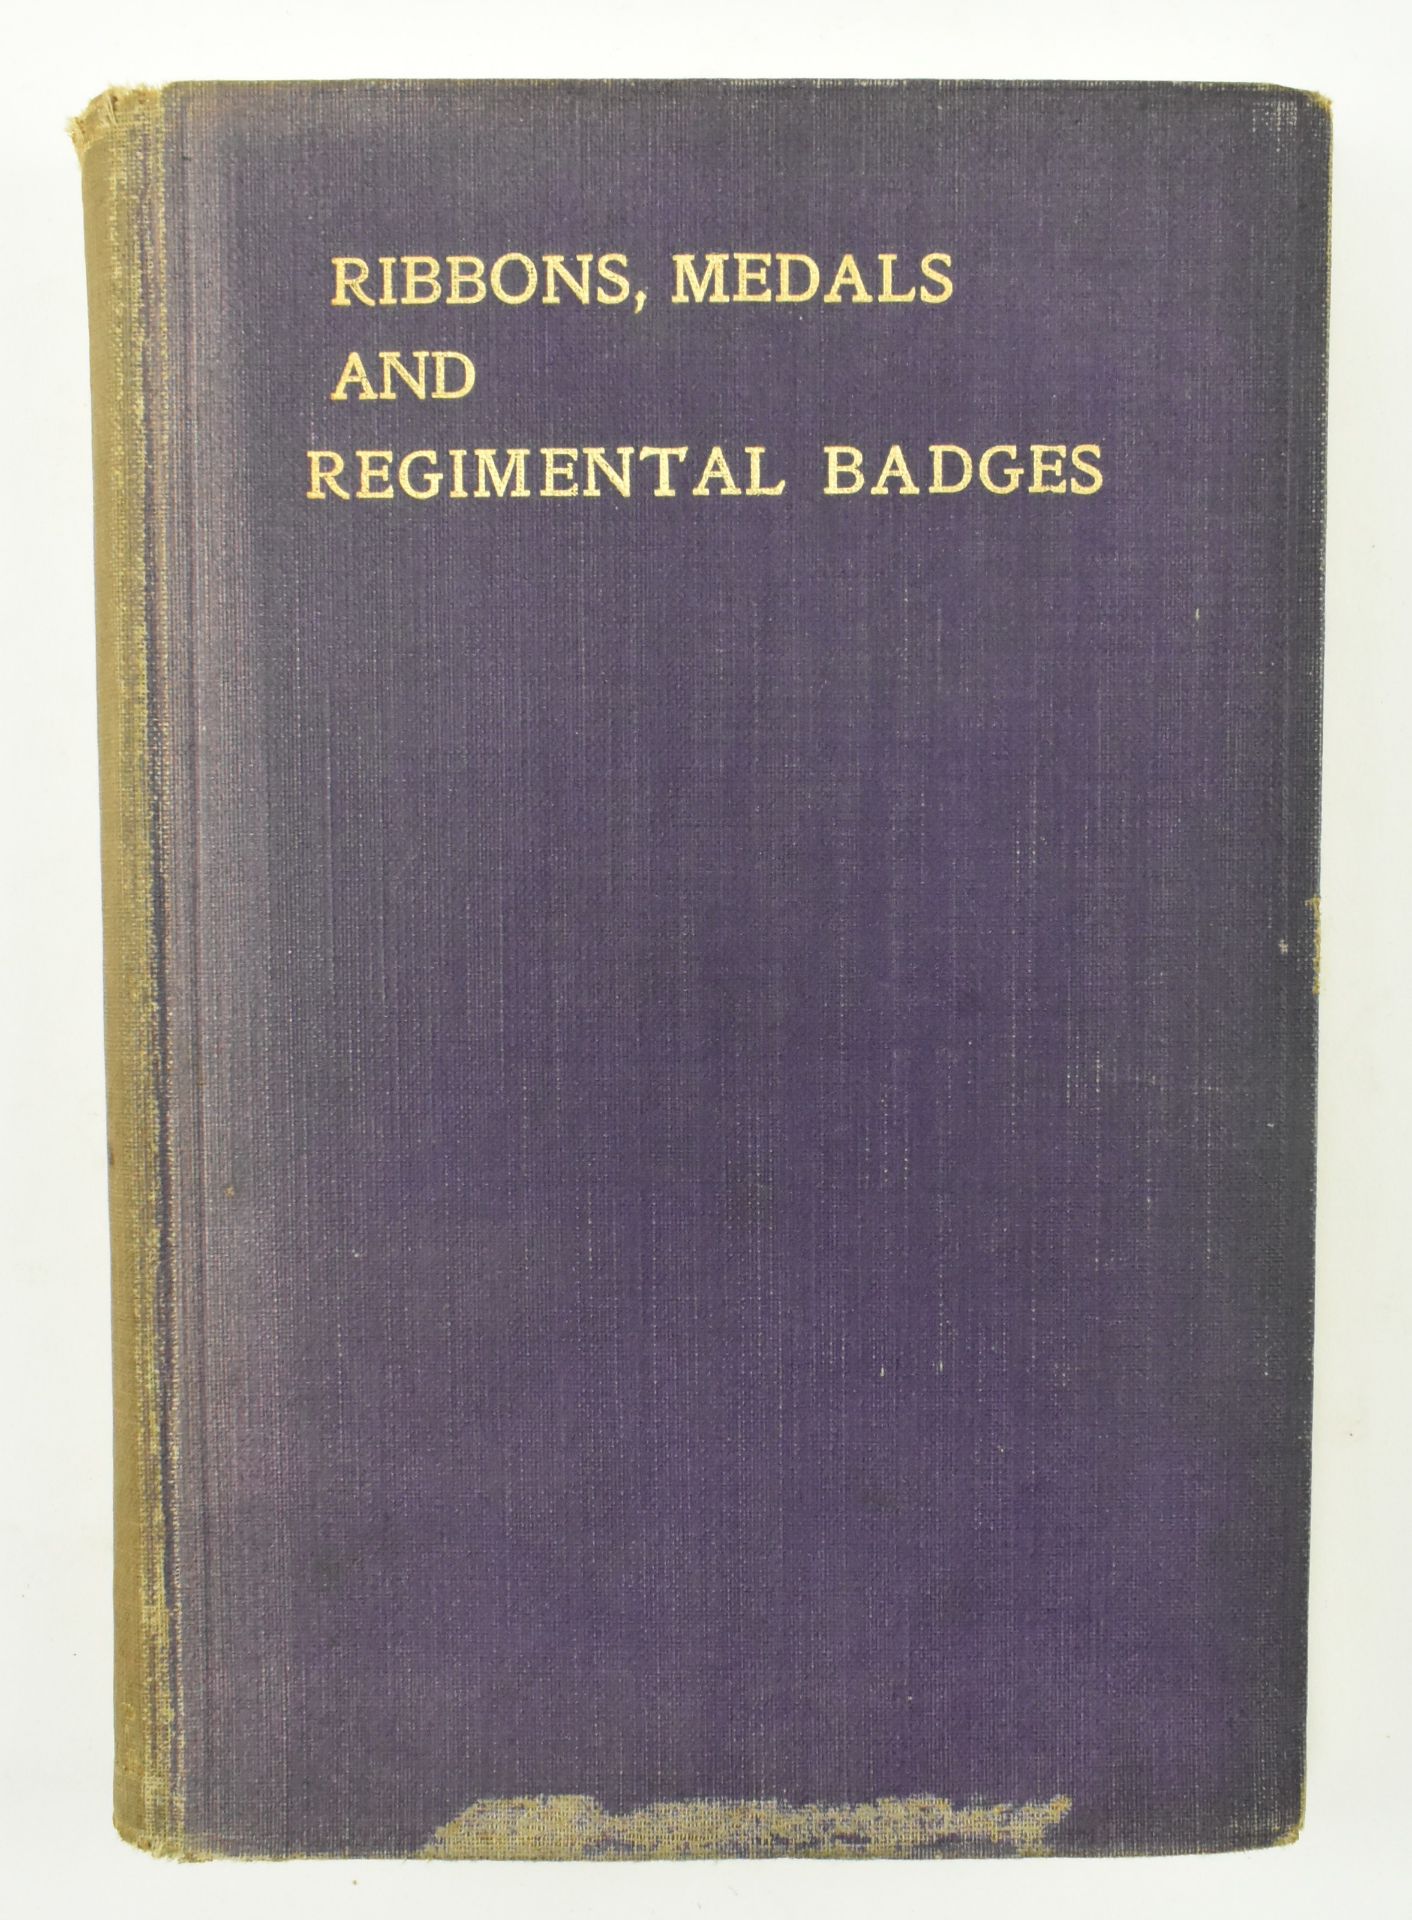 MILITARY INTEREST. A COLLECTION OF MILITARY BOOKS - Image 10 of 12